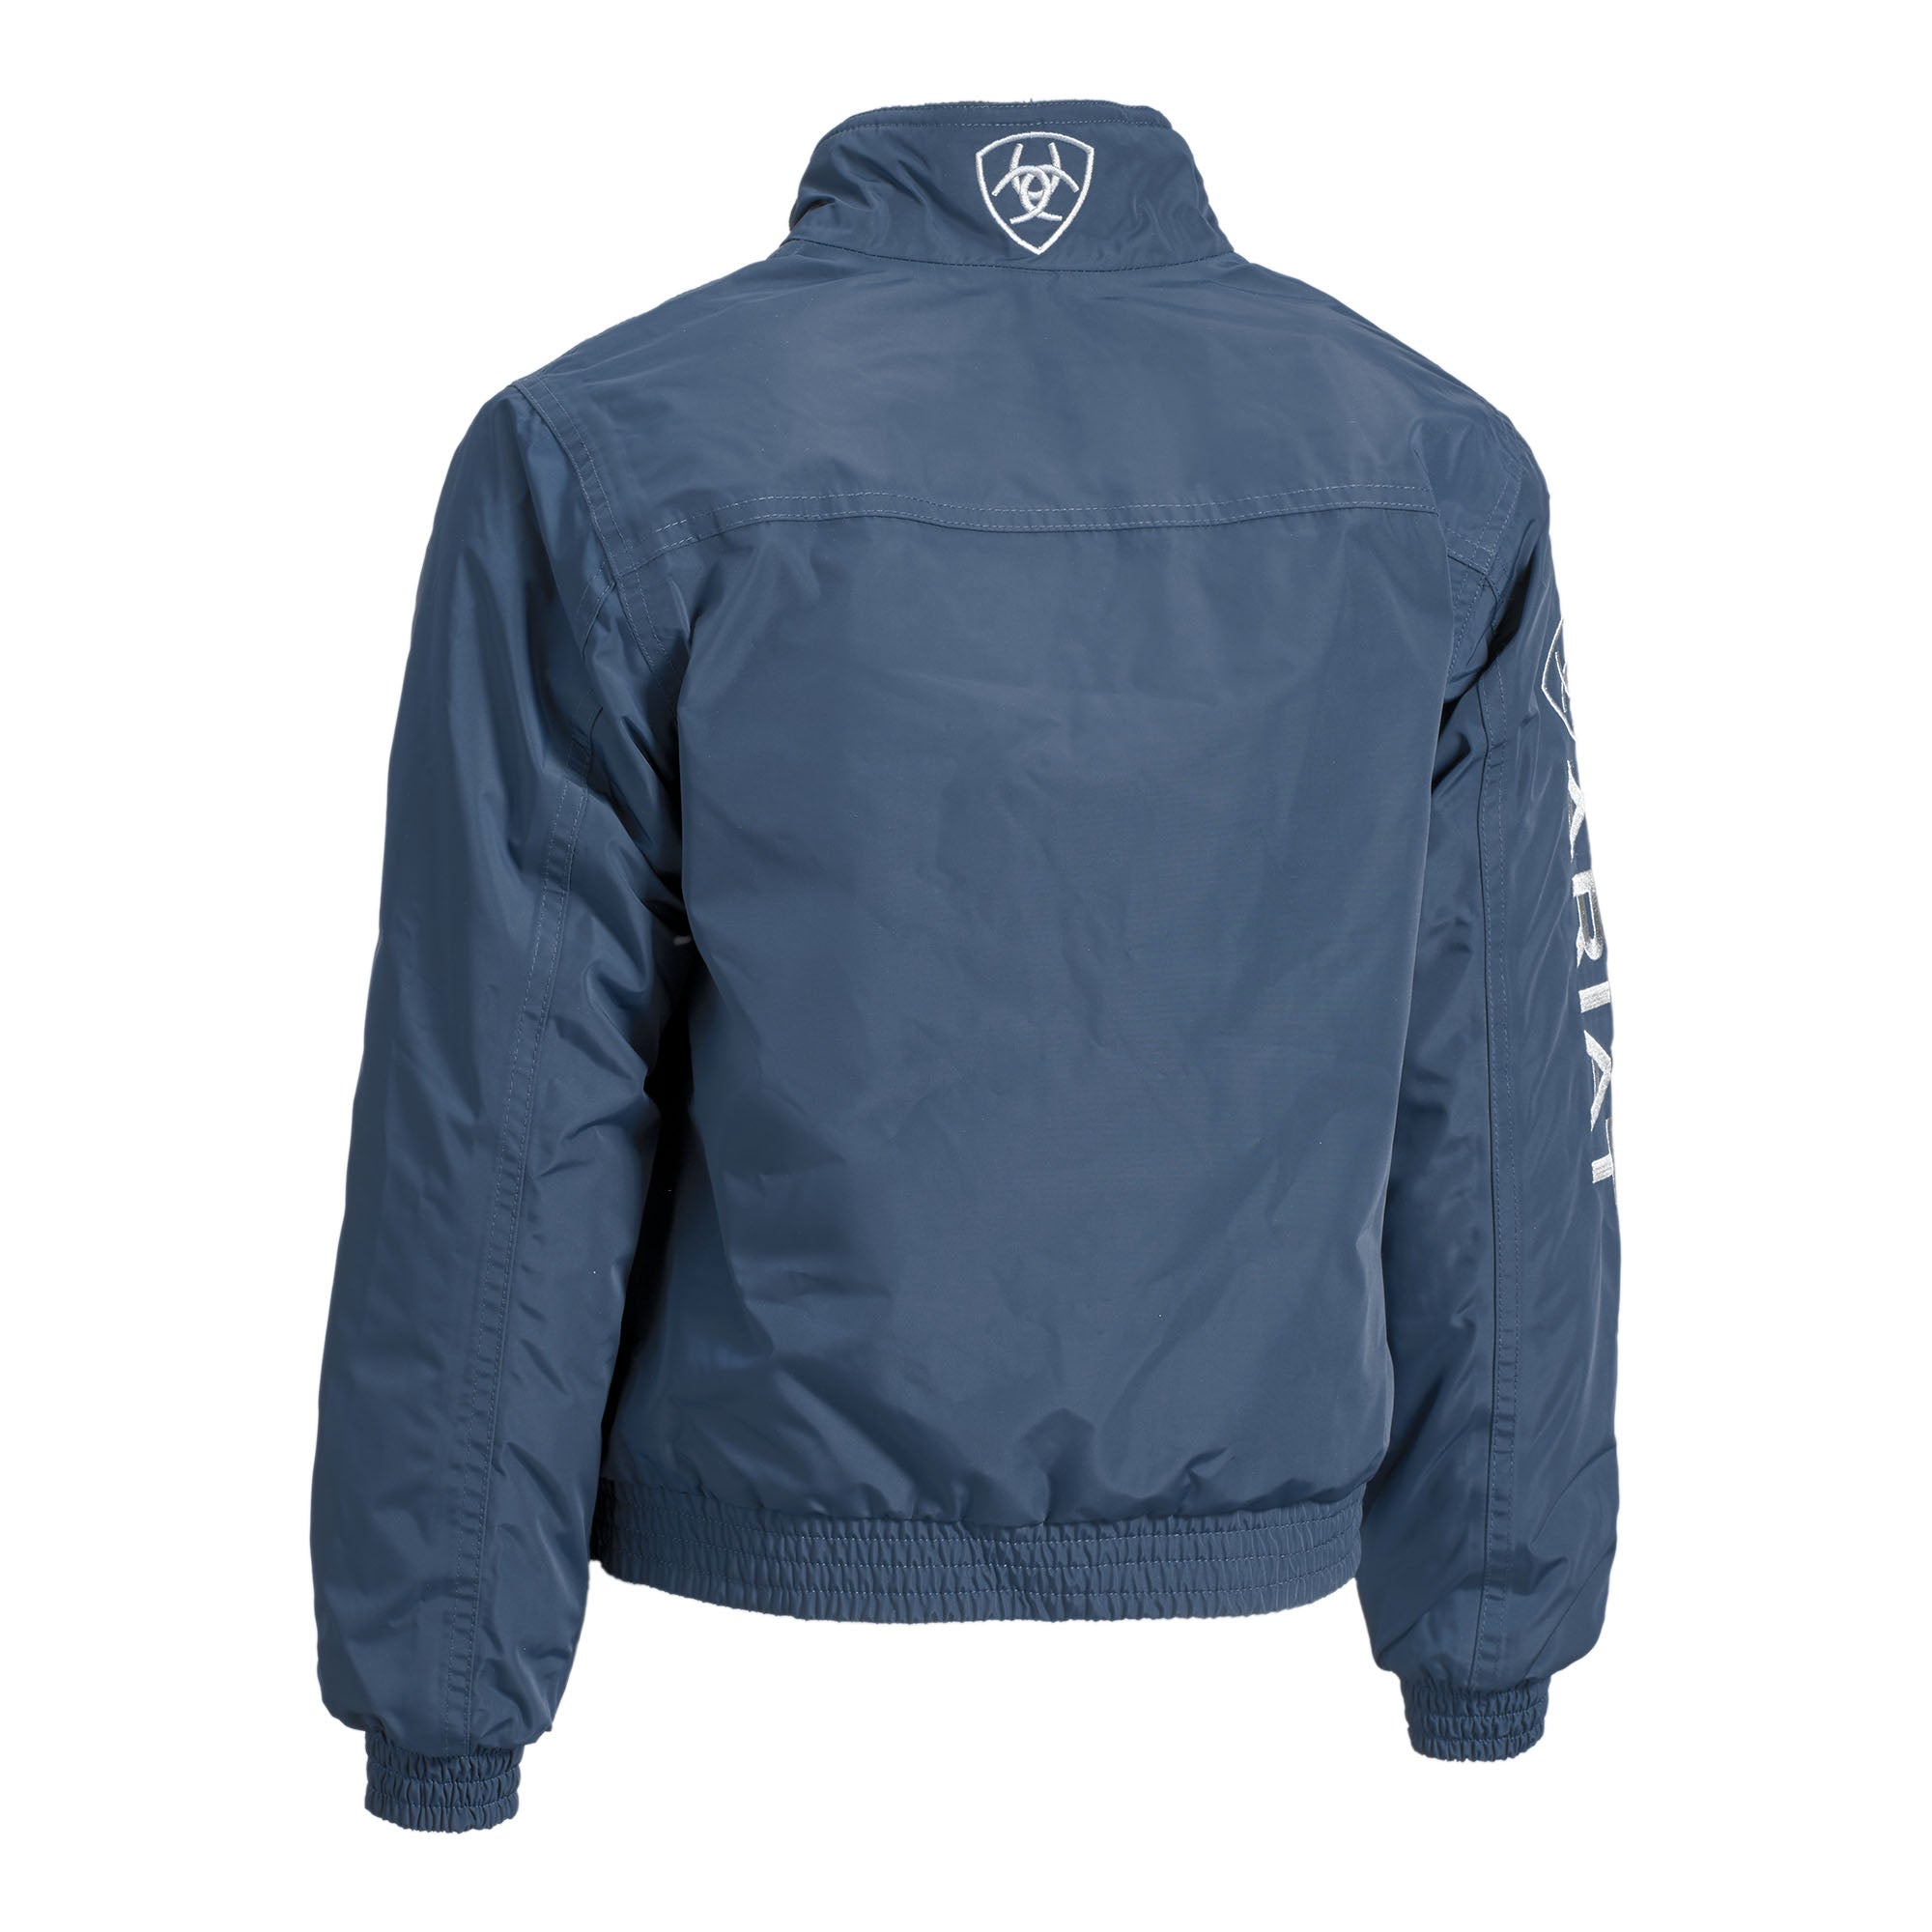 Ariat Youth Stable Team Jacket Navy